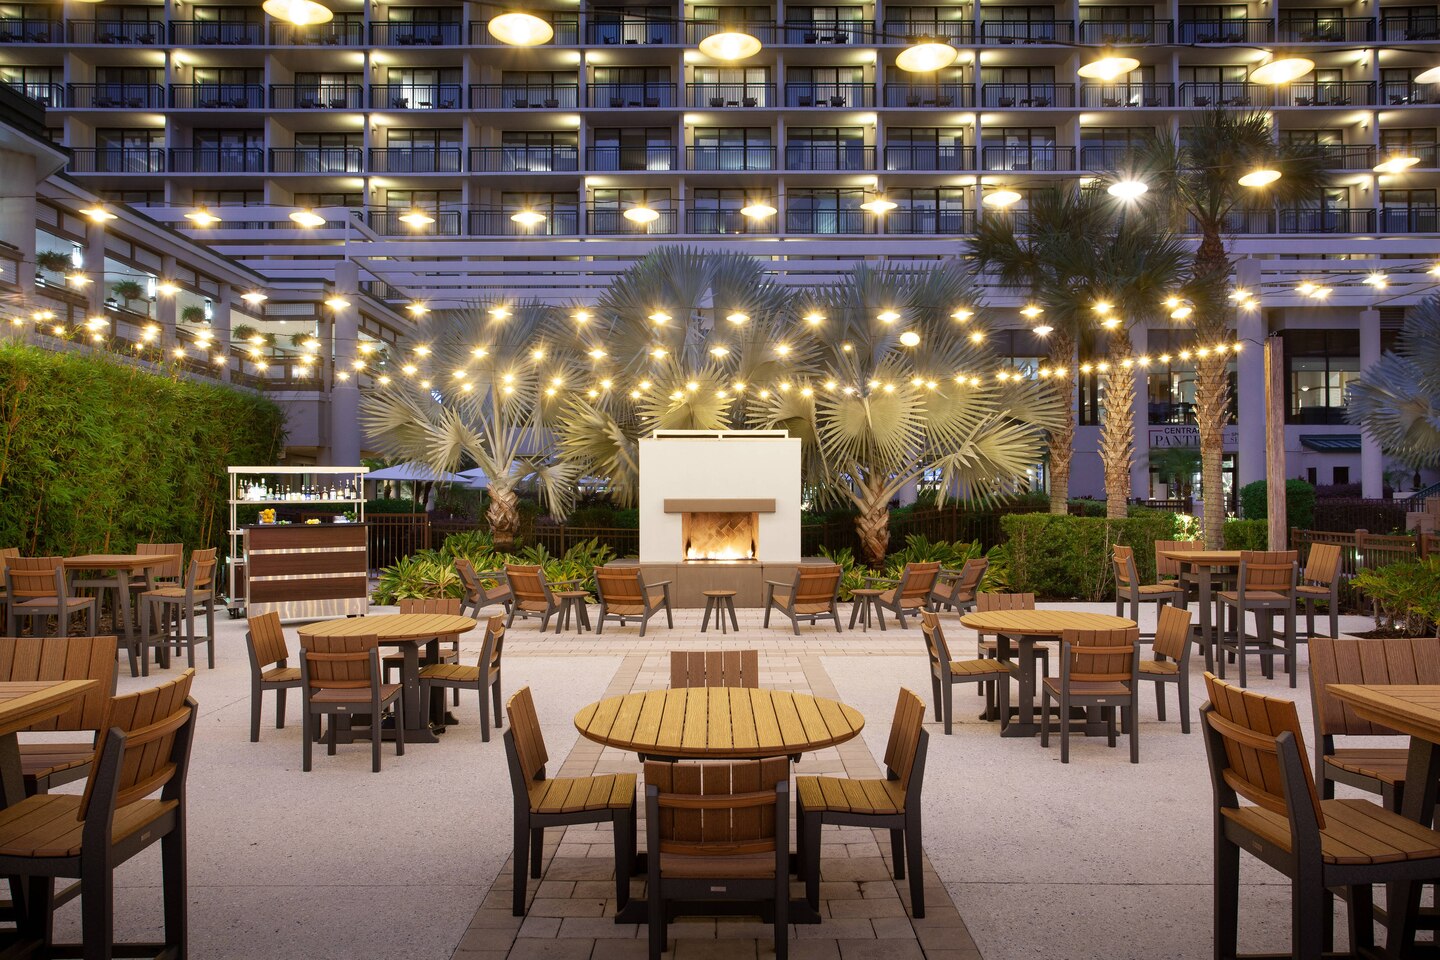 A patio with wooden chairs and black accent lit up with string lights over head outside with palm trees and a hotel in the background